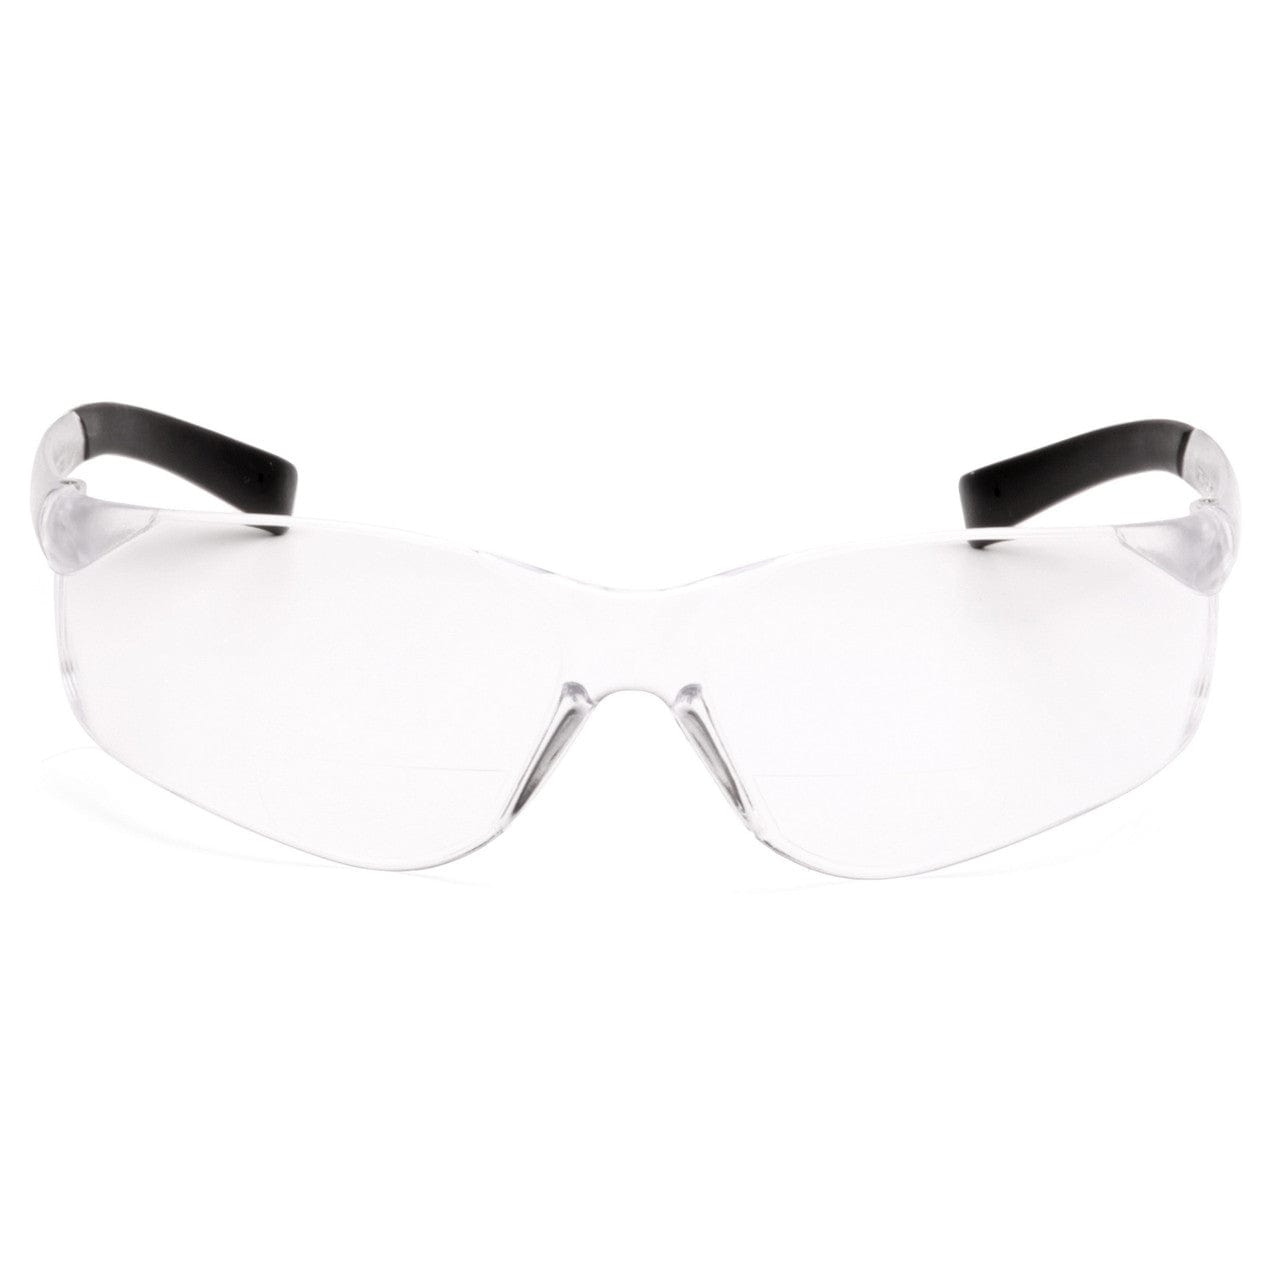 Pyramex Ztek Bifocal Safety Glasses with Clear Lens S2510R Front View